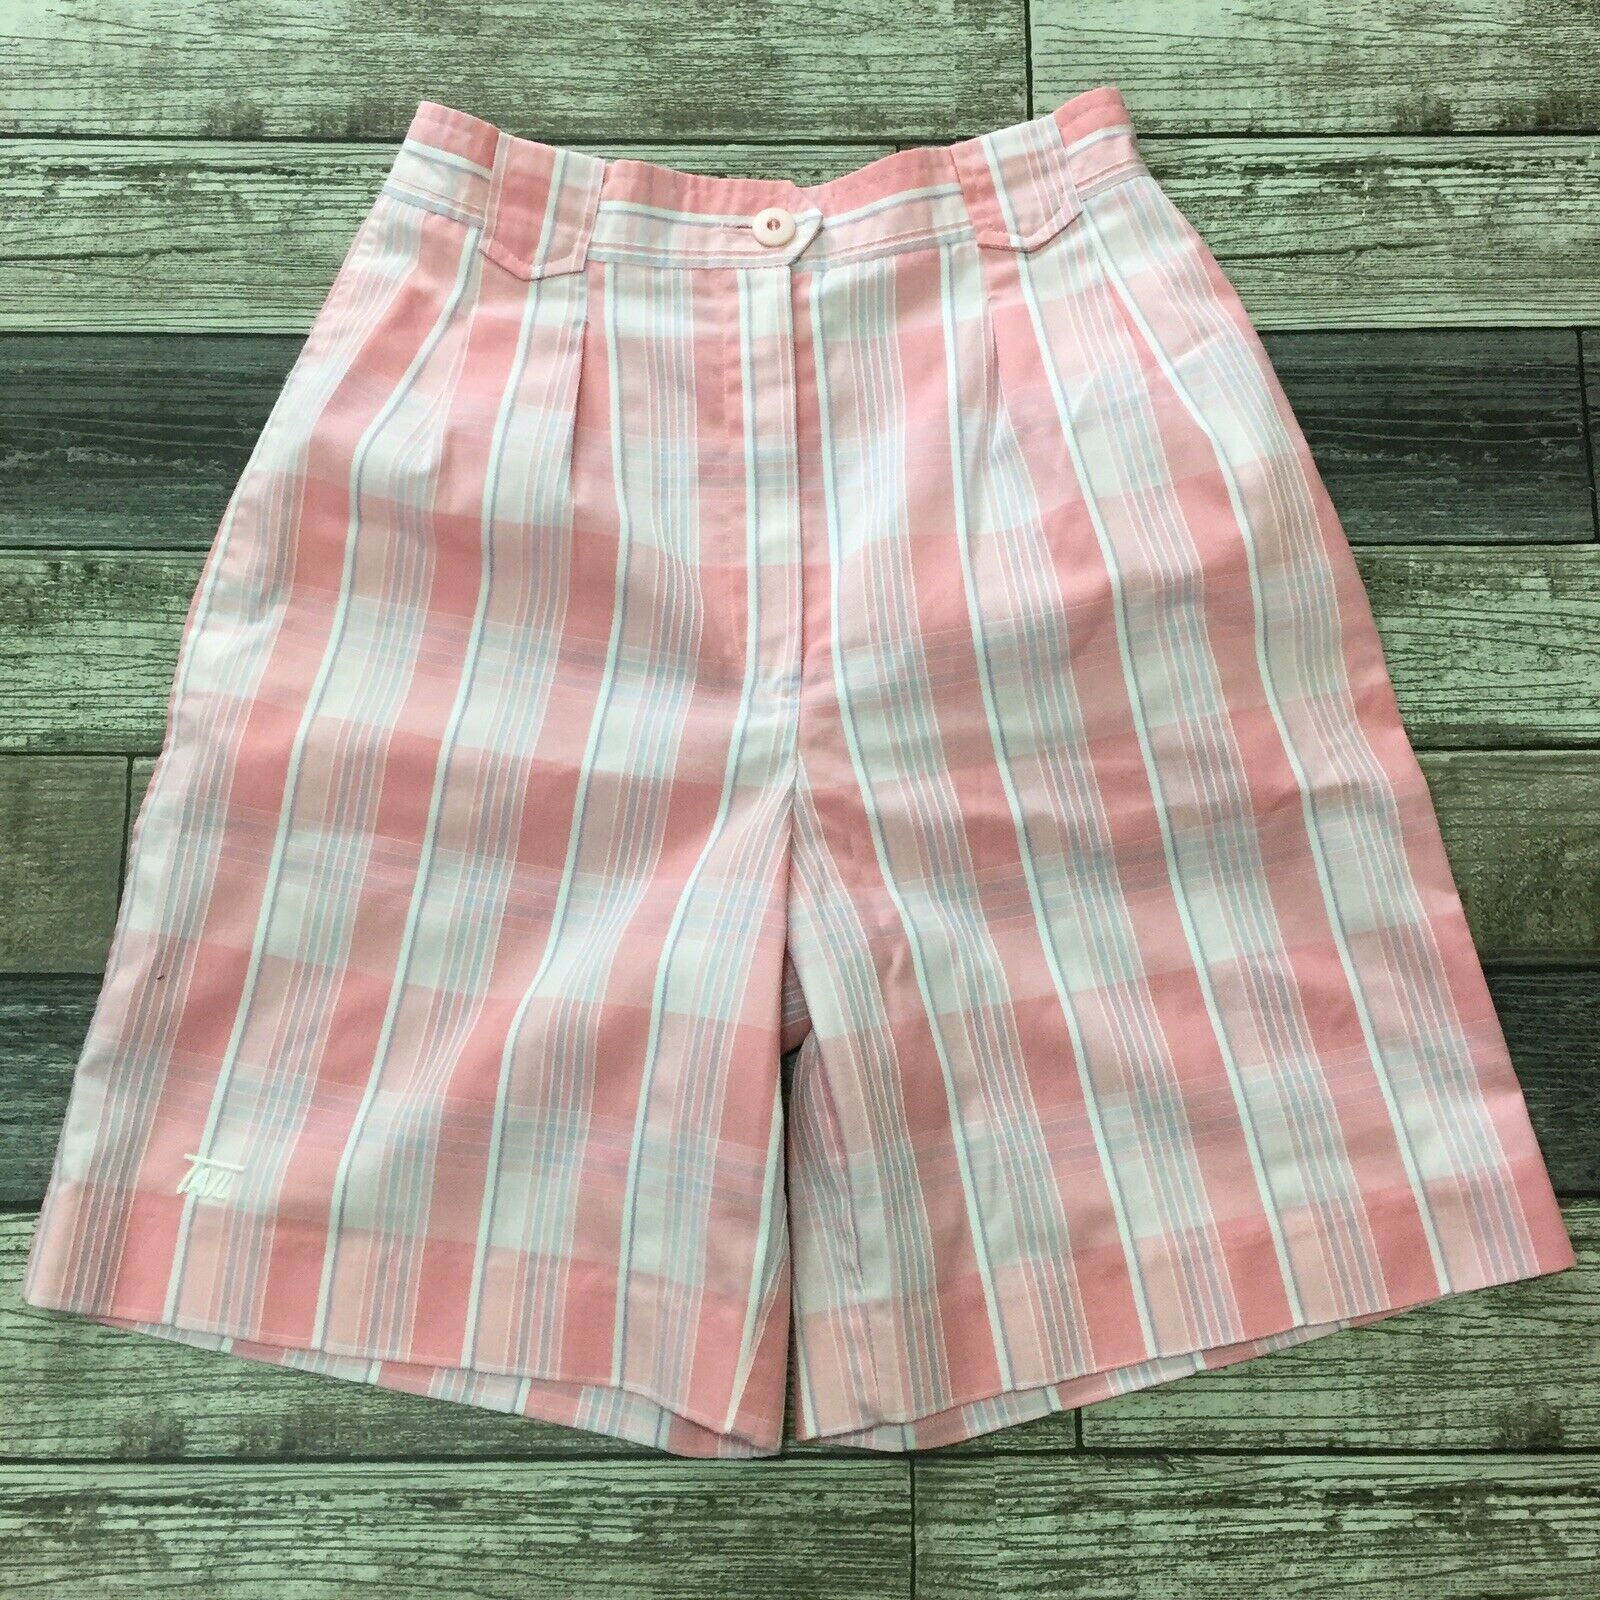 Vtg Tail Plaid Golf Tennis Shorts Women’s S (inseam 8) Pink Usa Made See Details